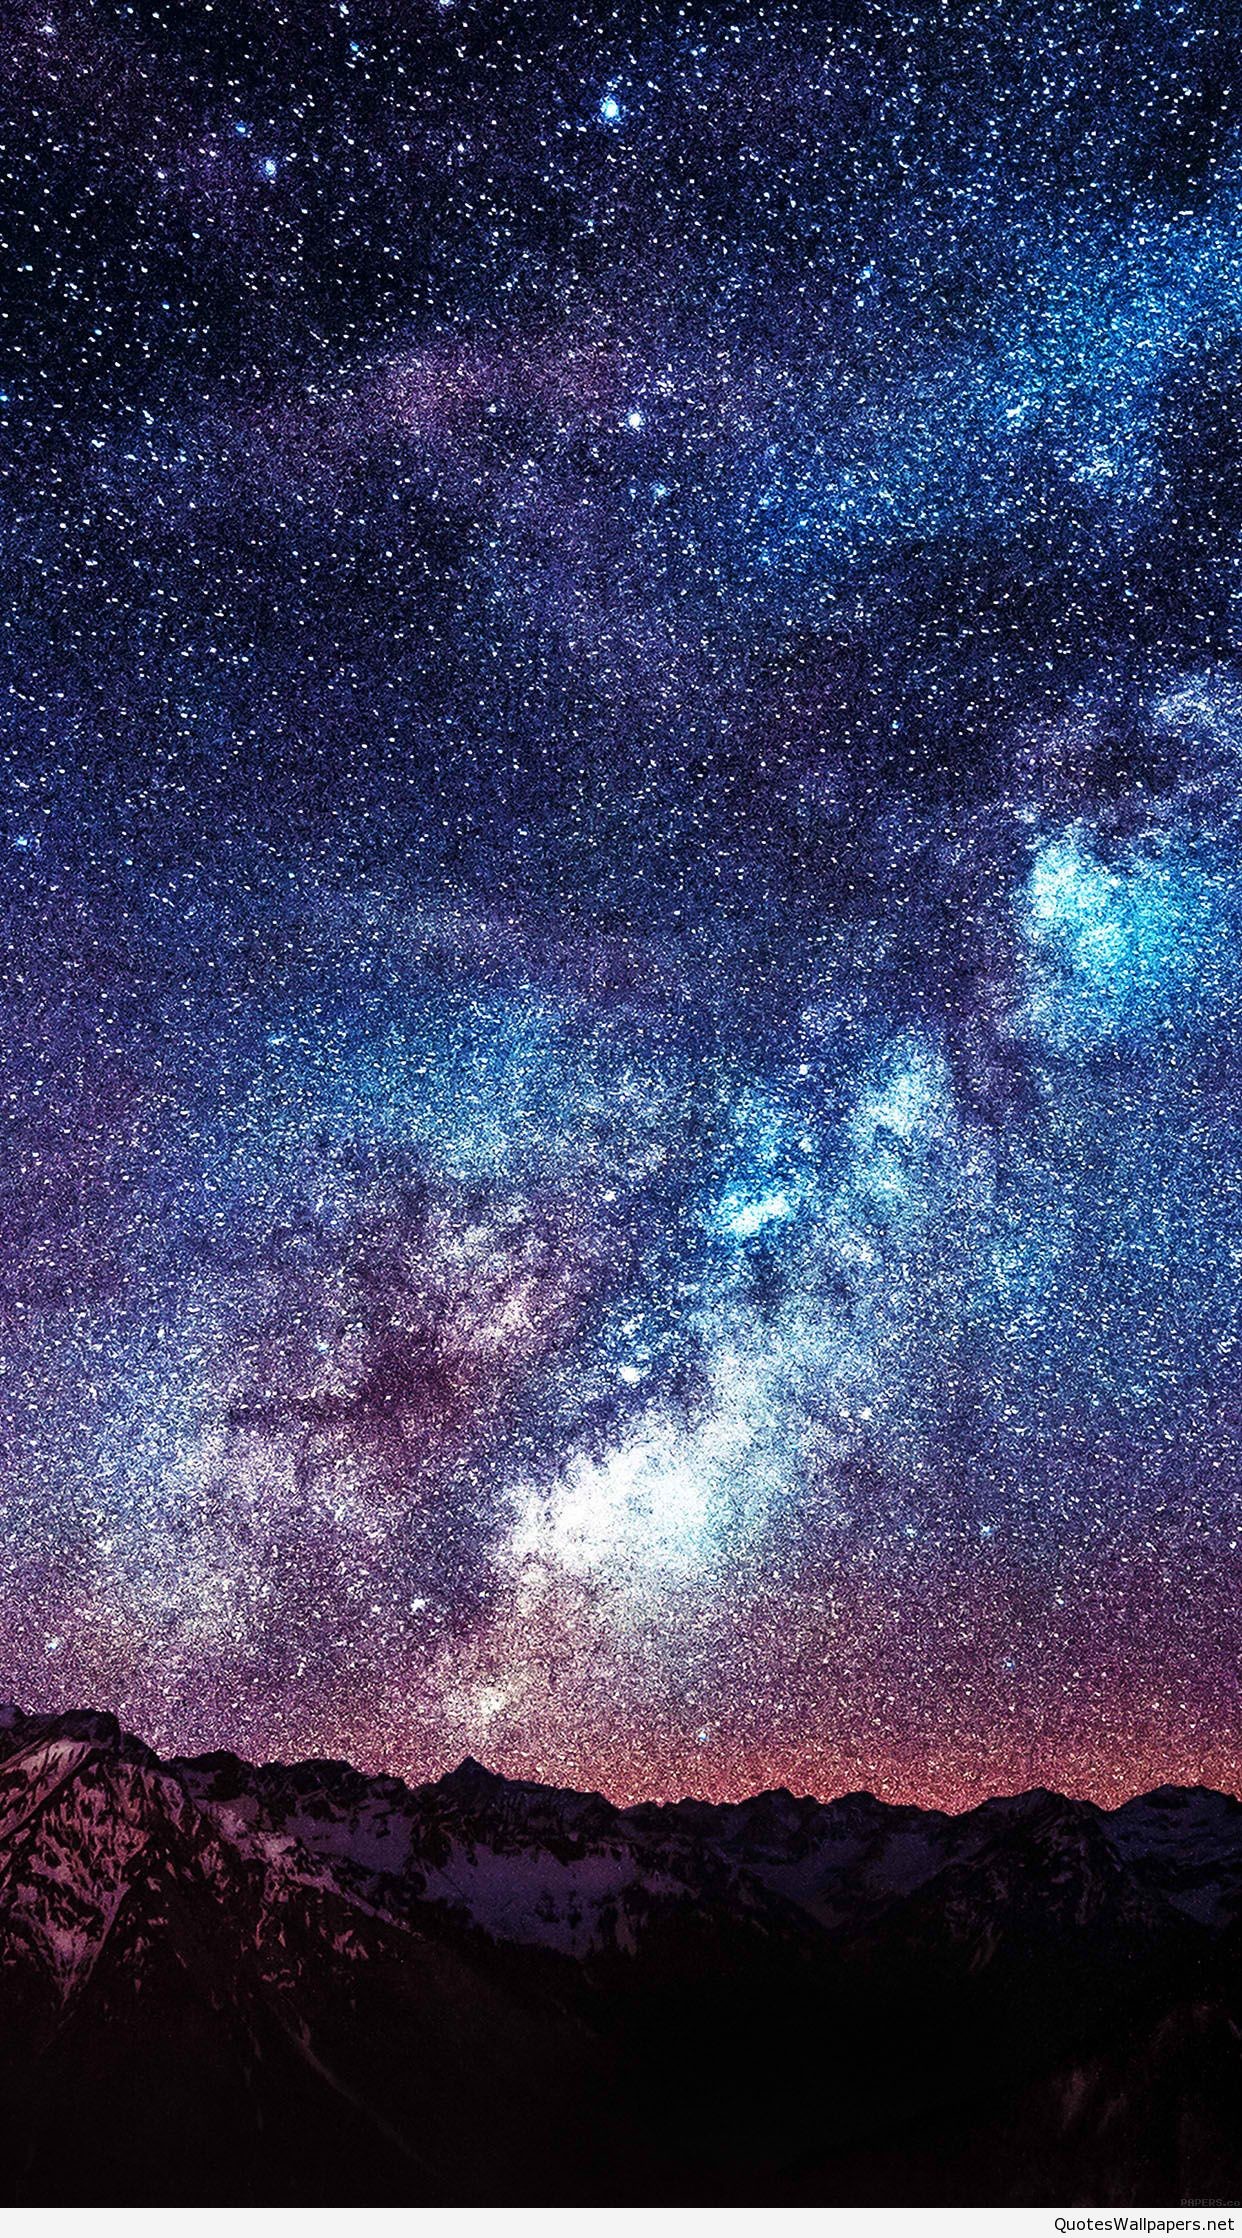 1242x2238 wallpaper-amazing-milkyway-space-mountain-red-34-iphone6-